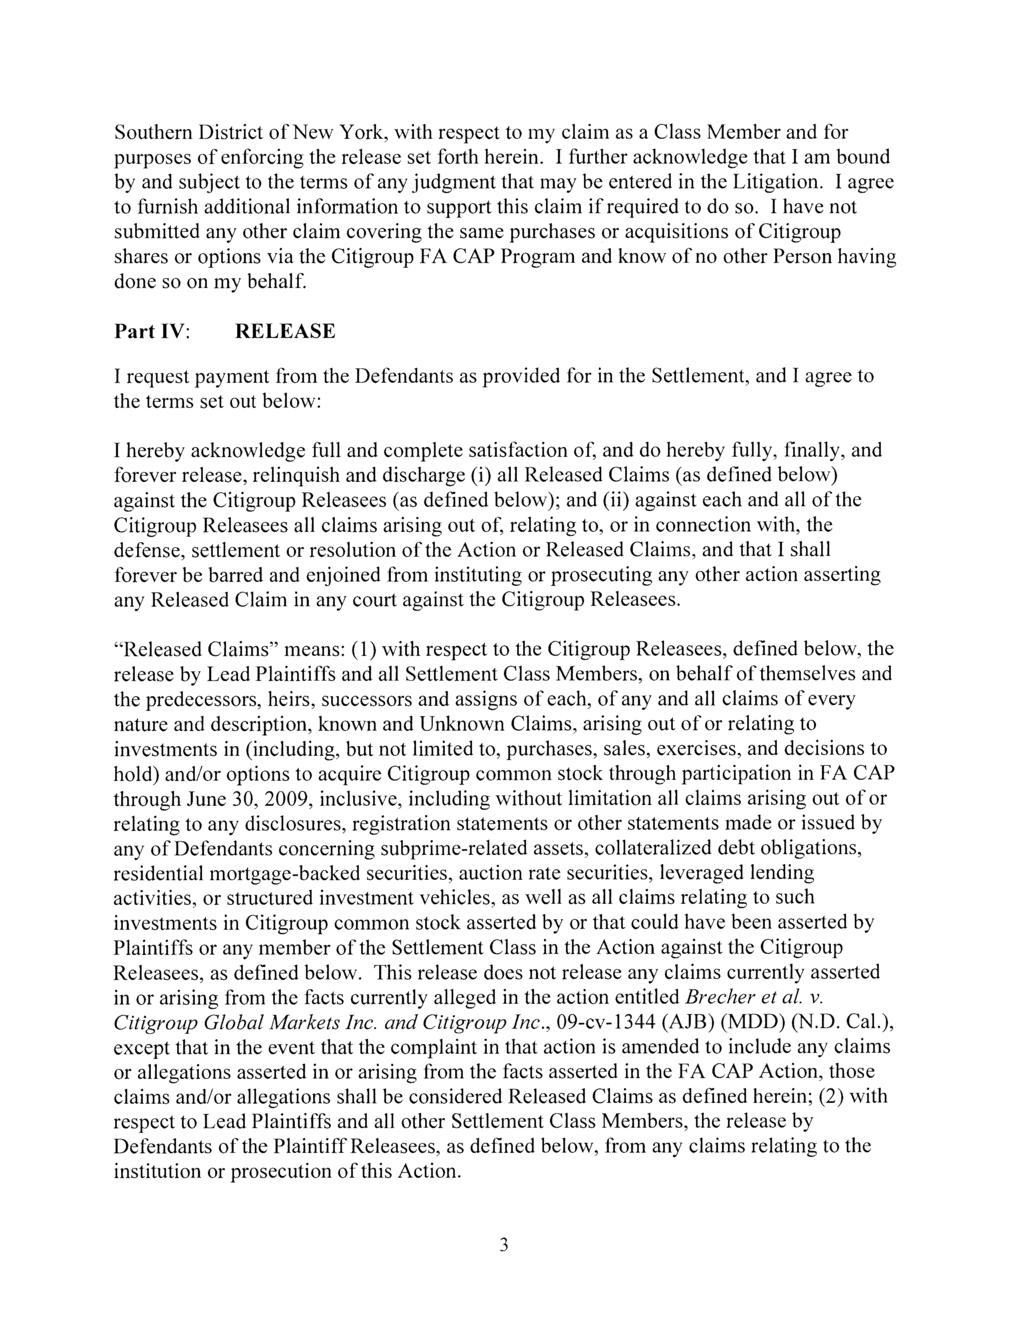 Case 1:09-cv-07359-SHS Document 50-1 Filed 01/22/14 Page 69 of 91 Southern District of New York, with respect to my claim as a Class Member and for purposes of enforcing the release set forth herein.